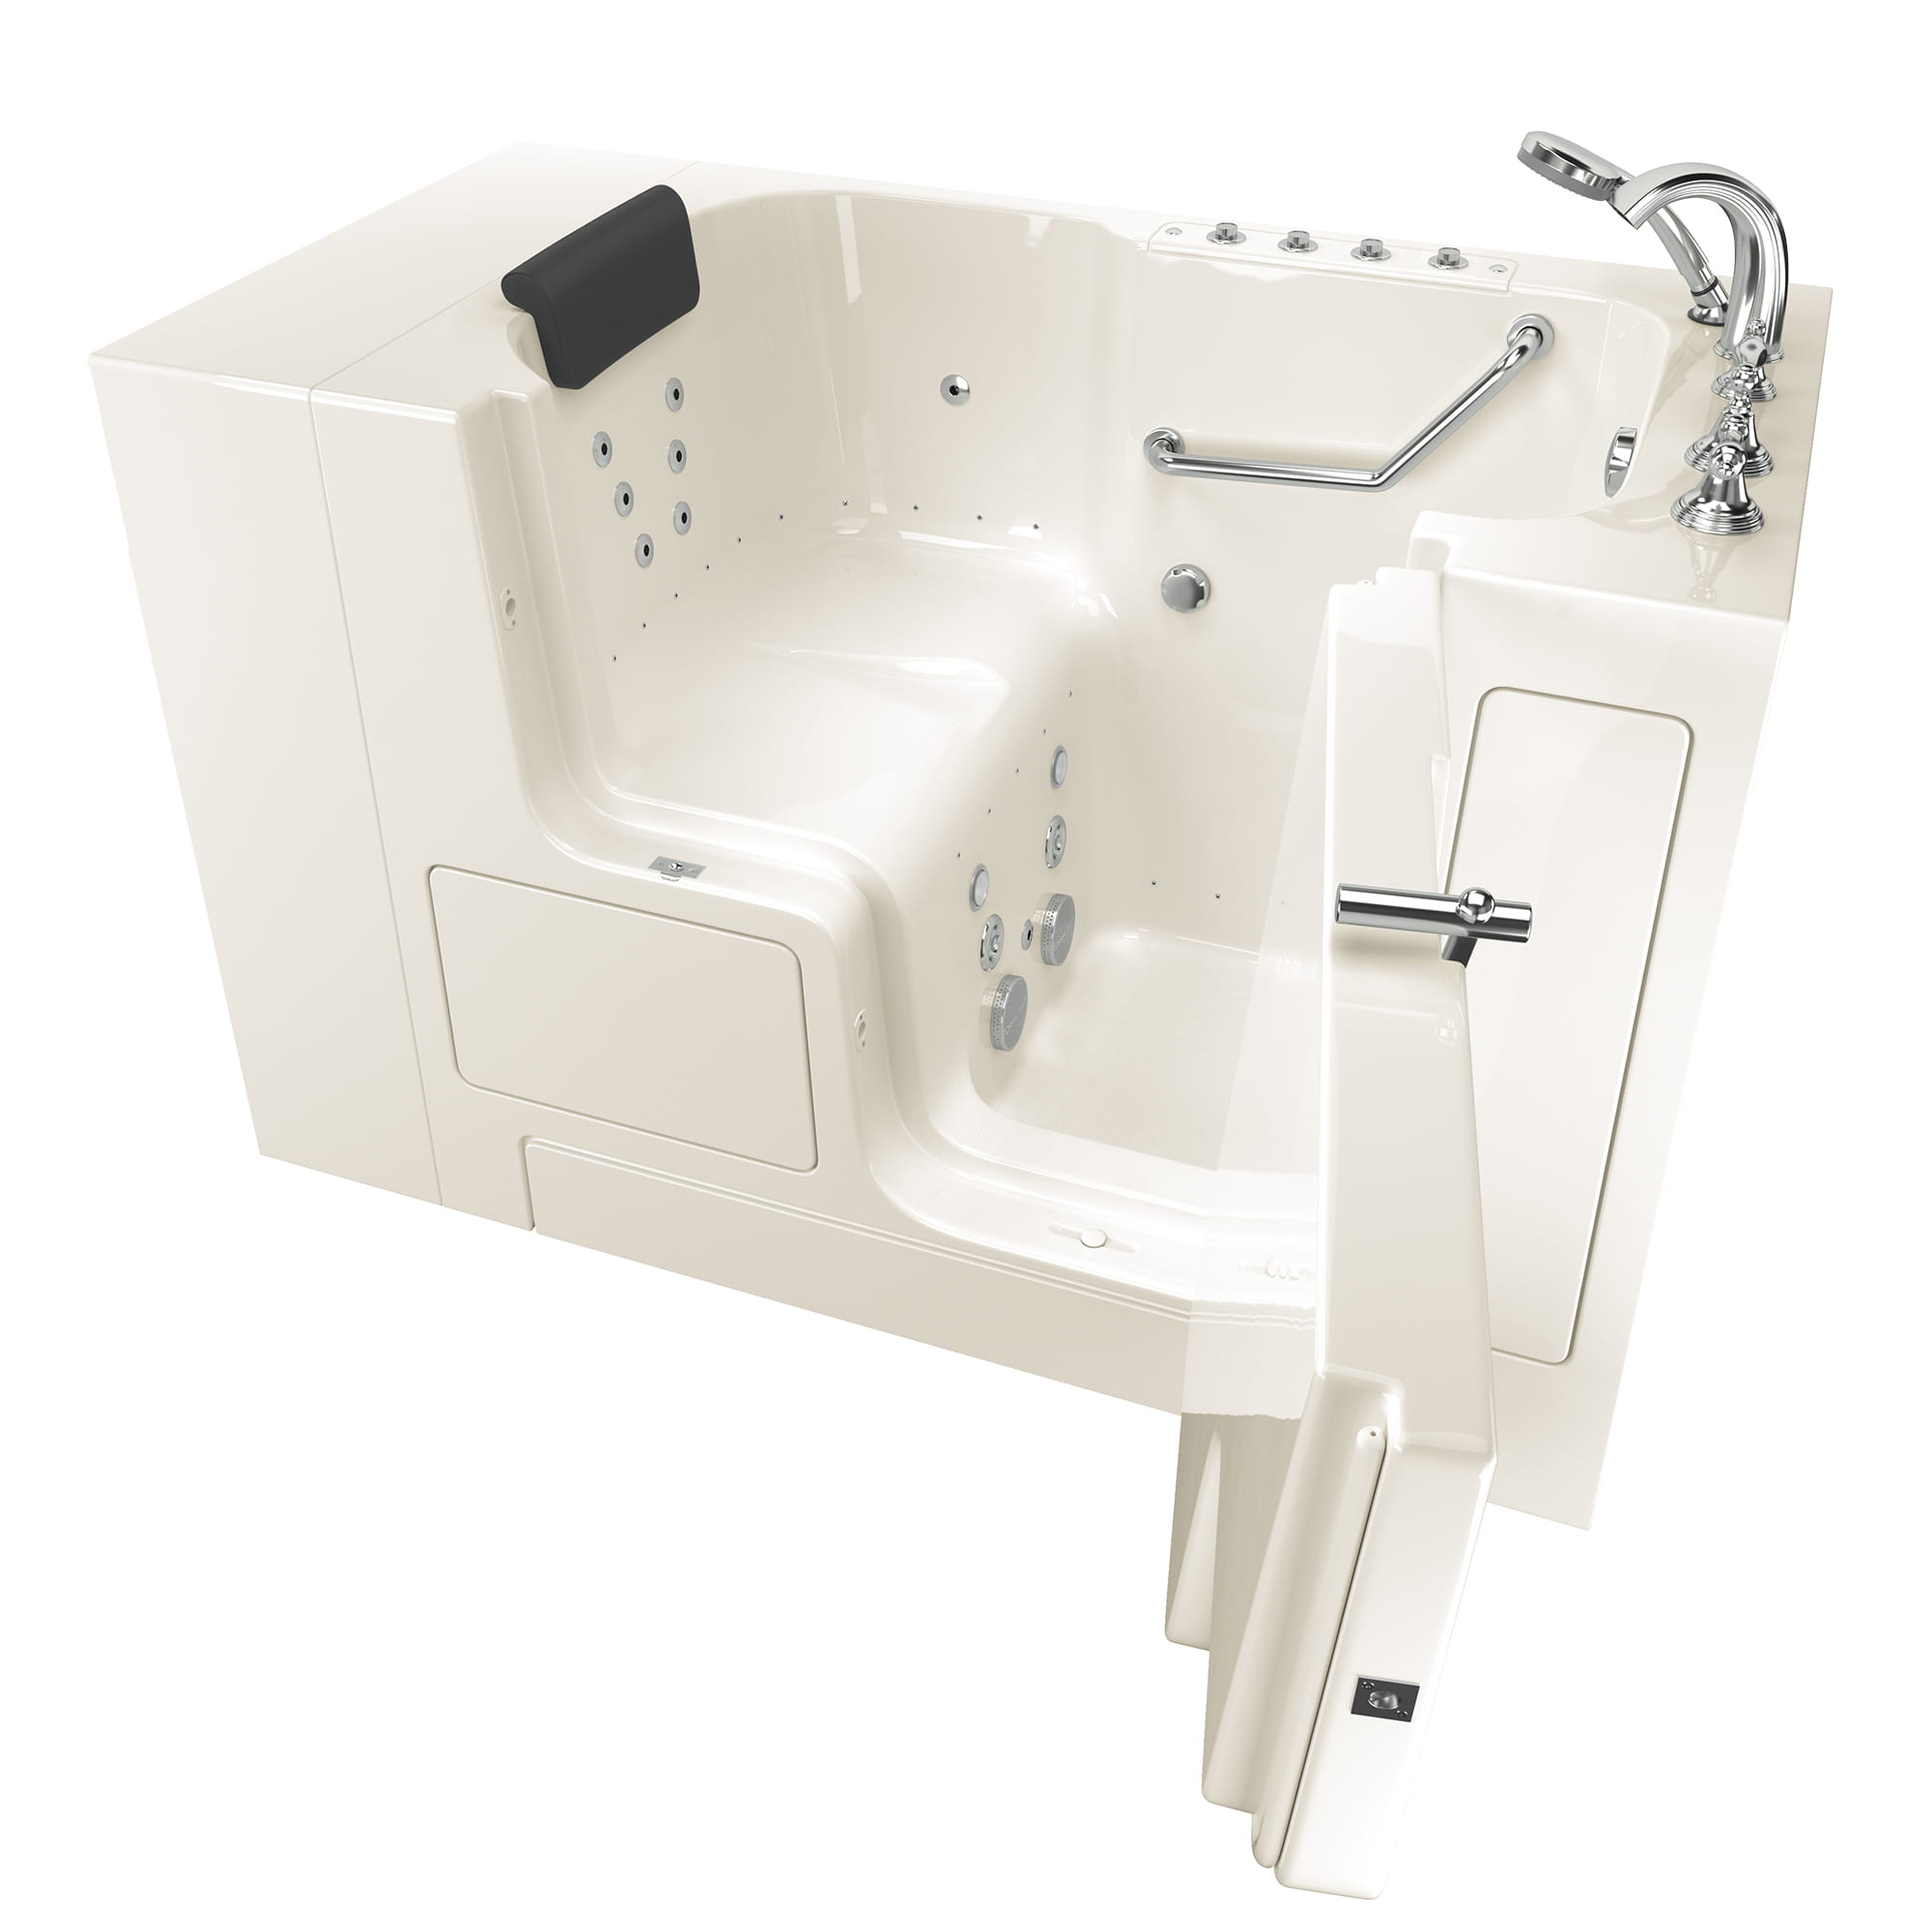 Gelcoat Premium Series 32 x 52  Inch Walk in Tub With Combination Air Spa and Whirlpool Systems   Right Hand Drain With Faucet WIB LINEN